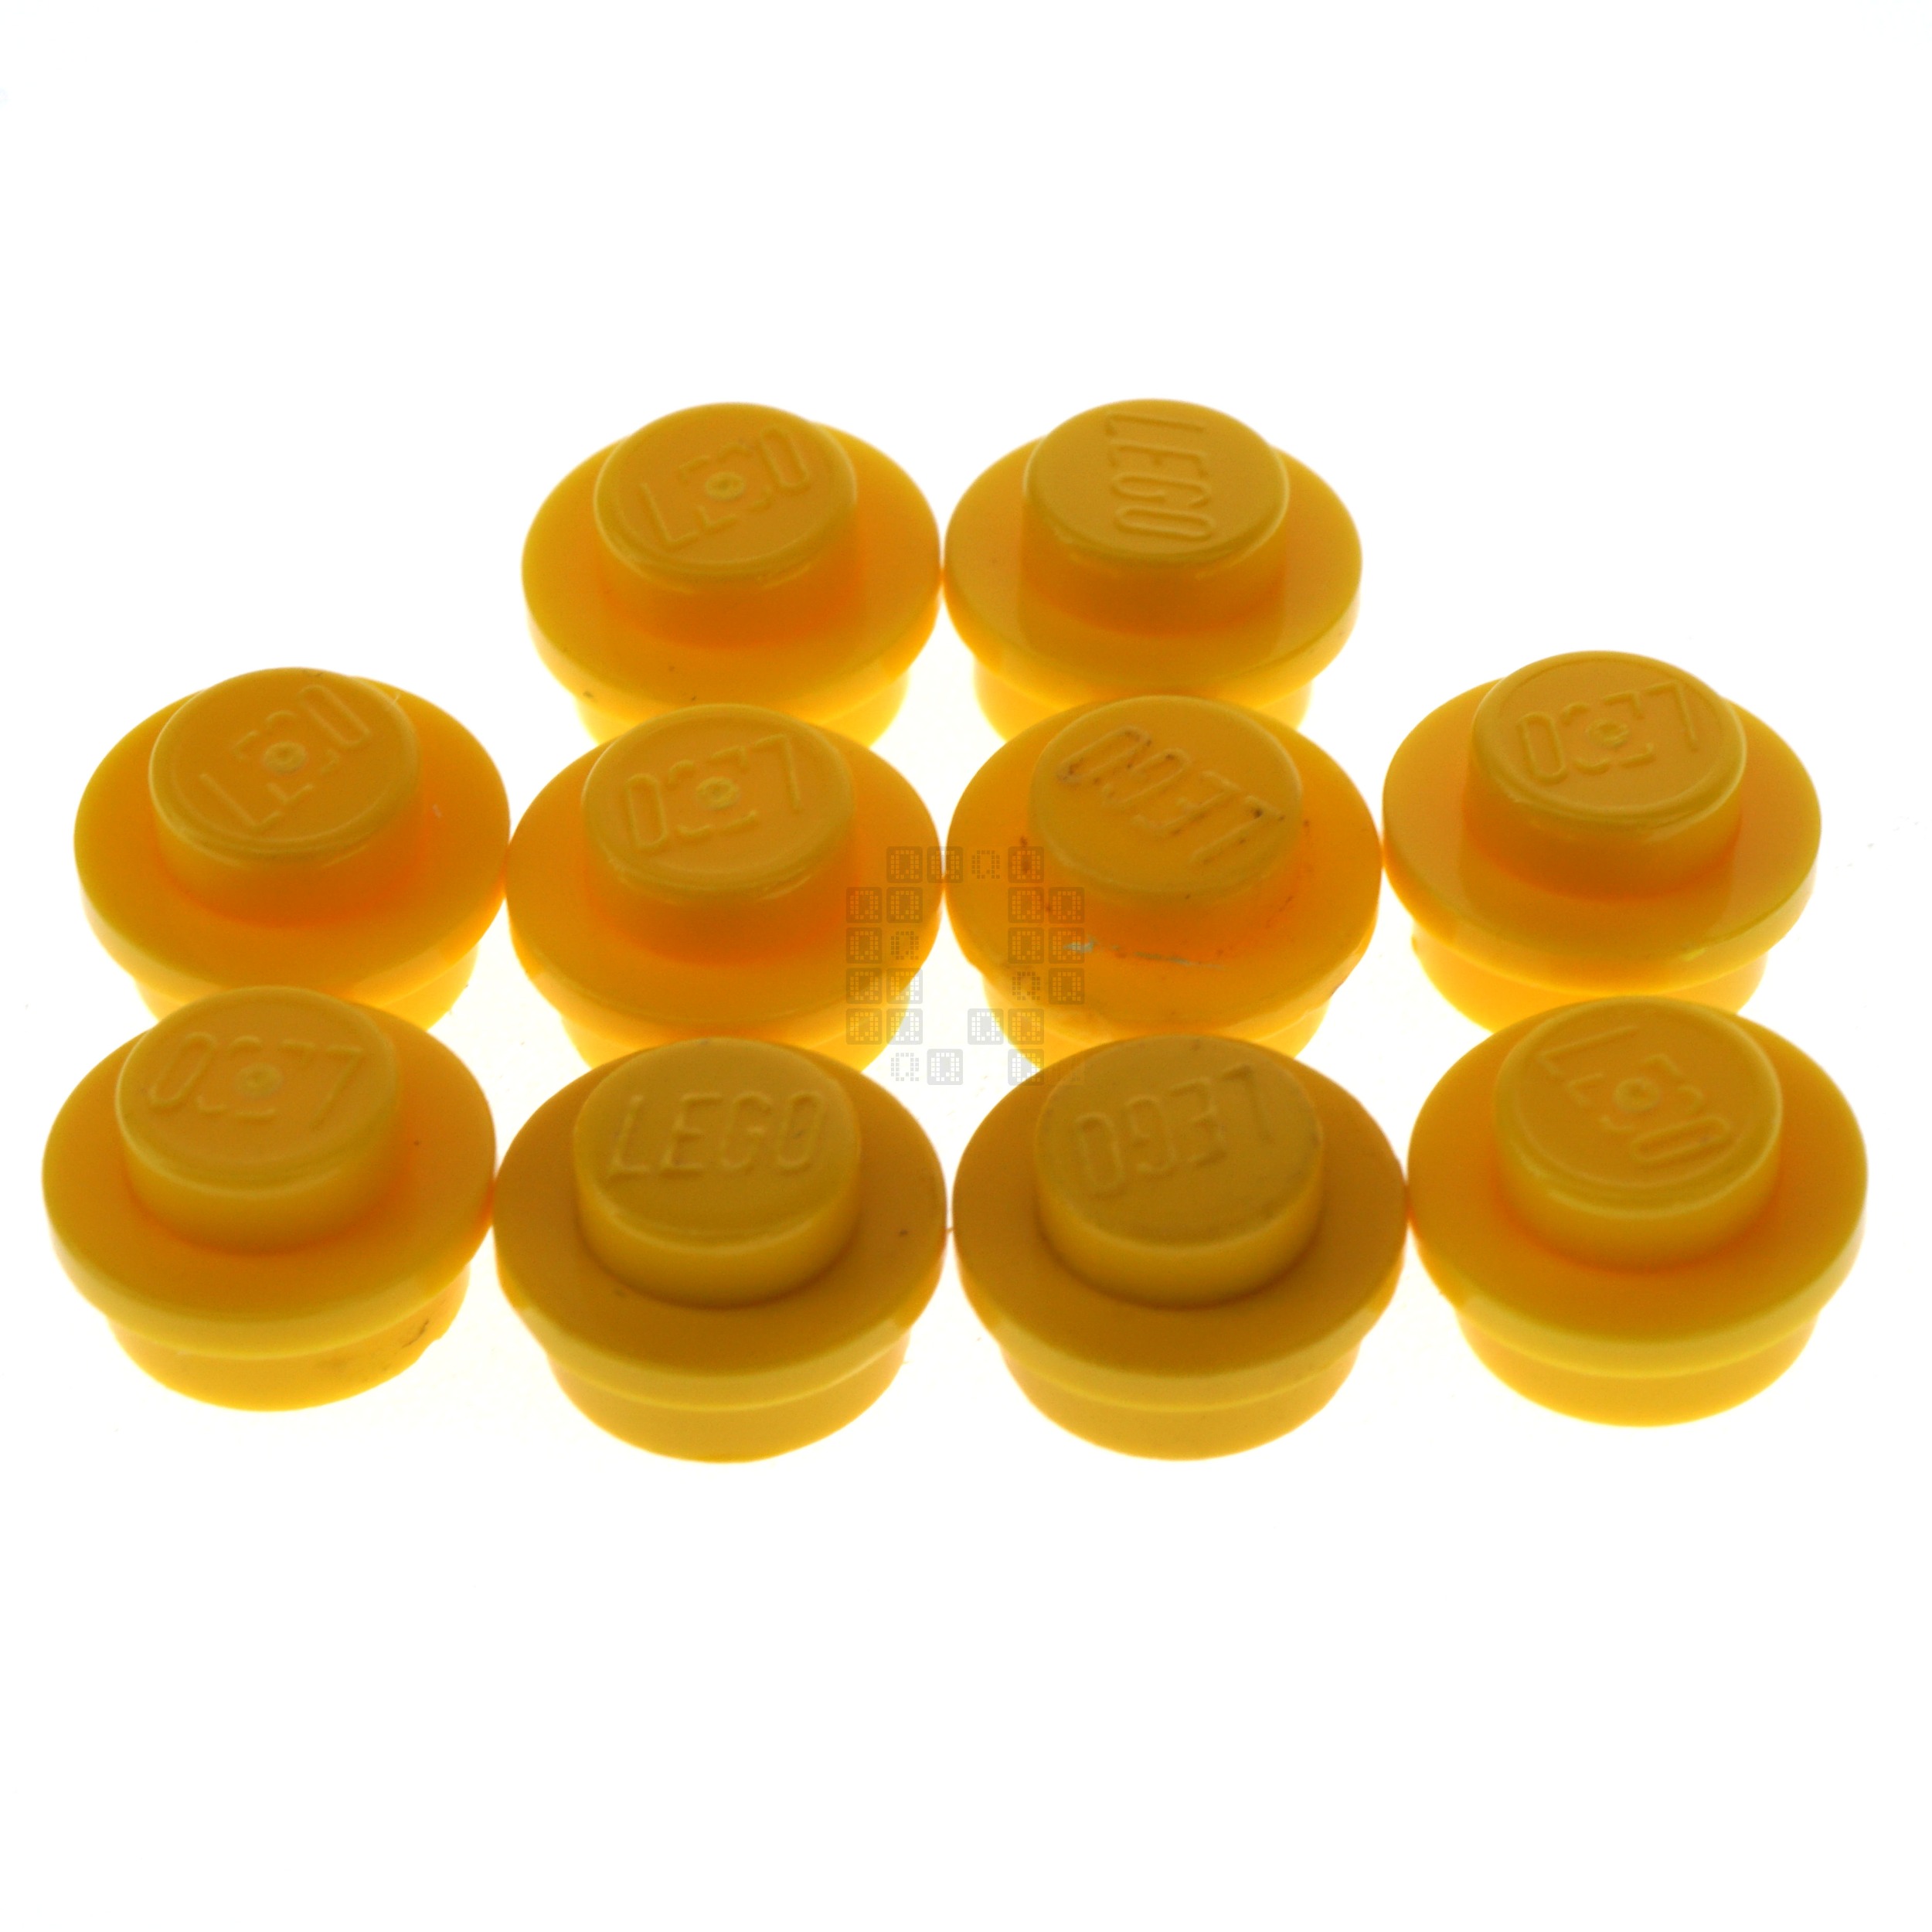 LEGO 614124 1x1 Round Plate, Bright Yellow , 10-Pack